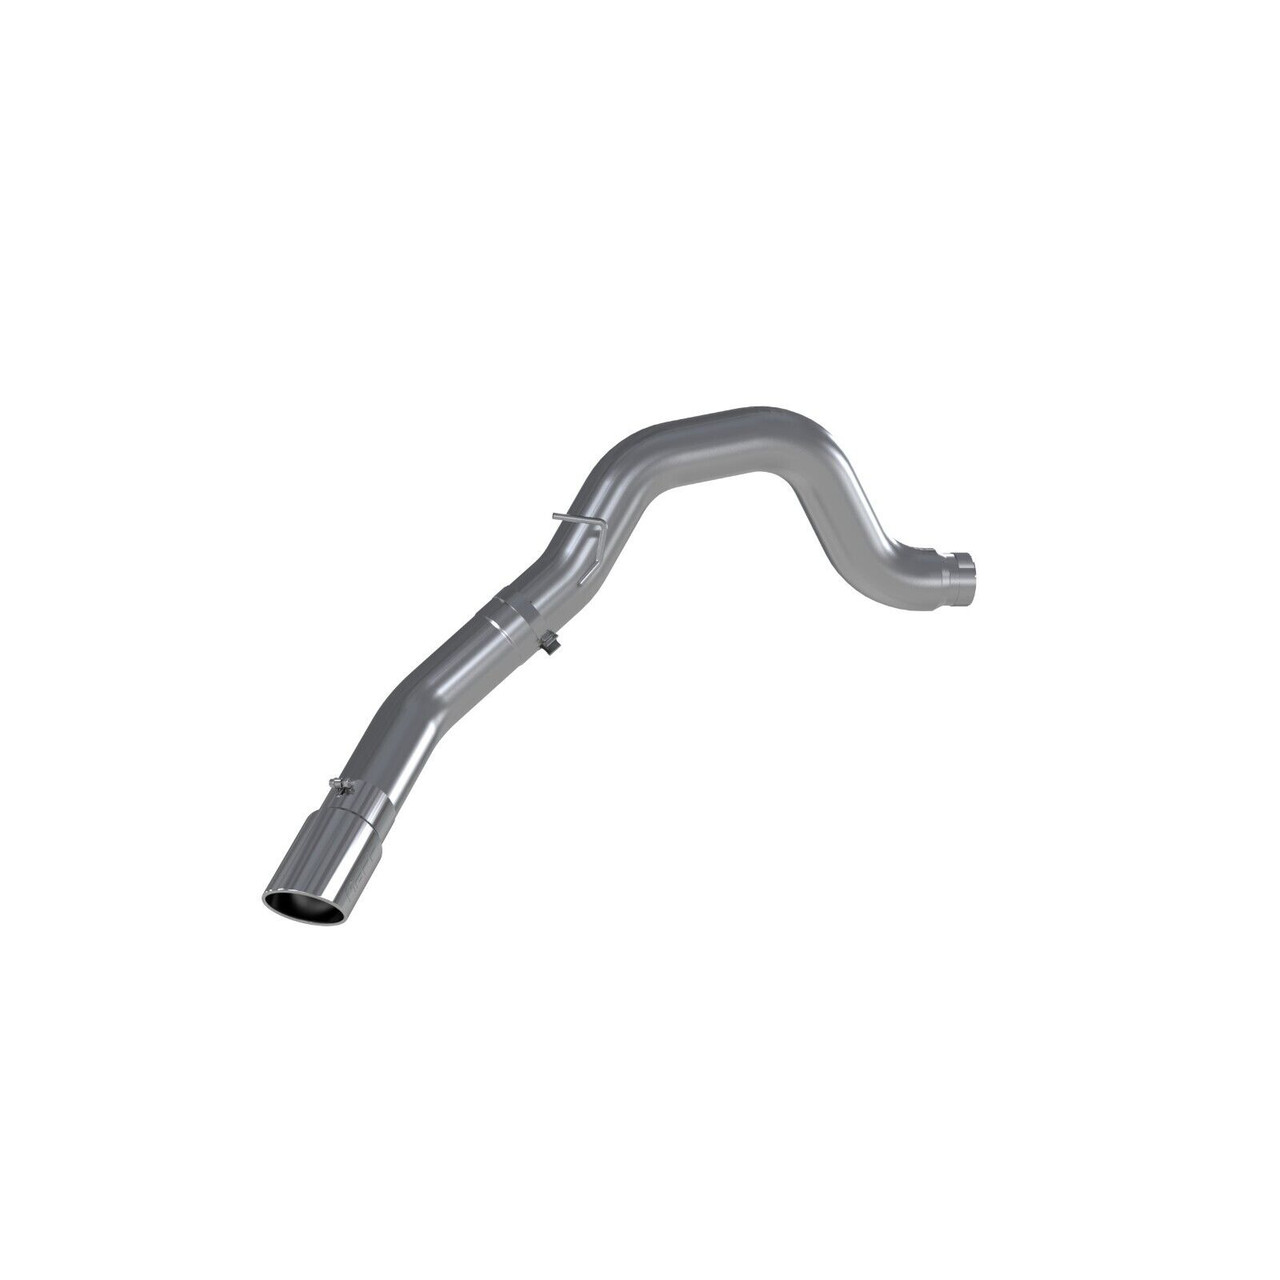 MBRP 5" DPF BACK STAINLESS EXHAUST WITH TIP FOR 13-18 DODGE RAM CUMMINS DIESEL